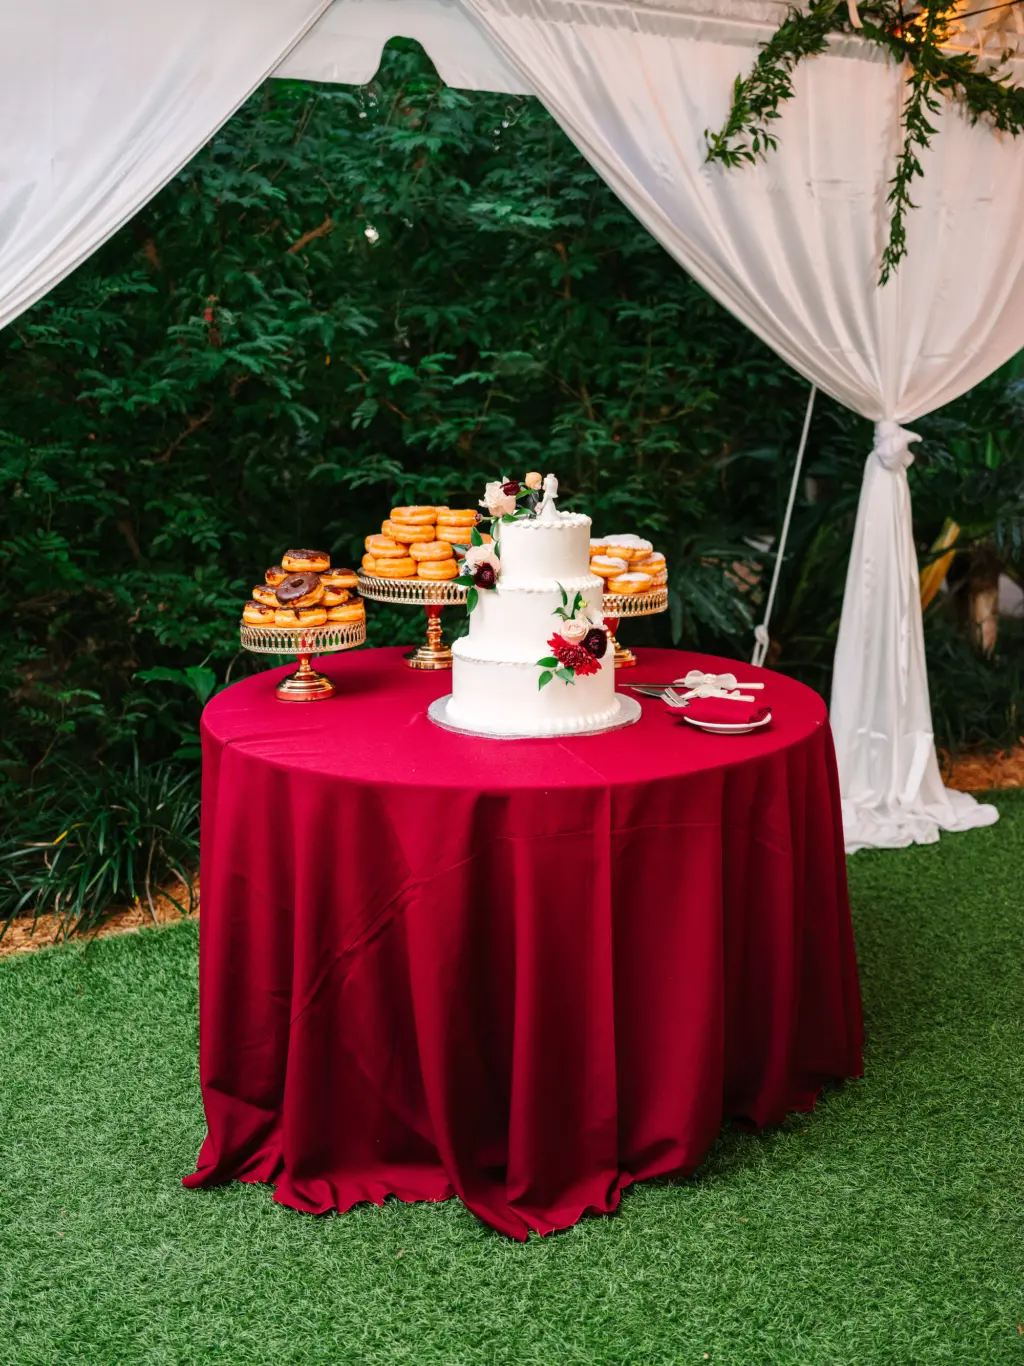 Three Tiered Round White Buttercream Cake with Red Rose Accents | Wedding Reception Cake and Donut Table Inspiration